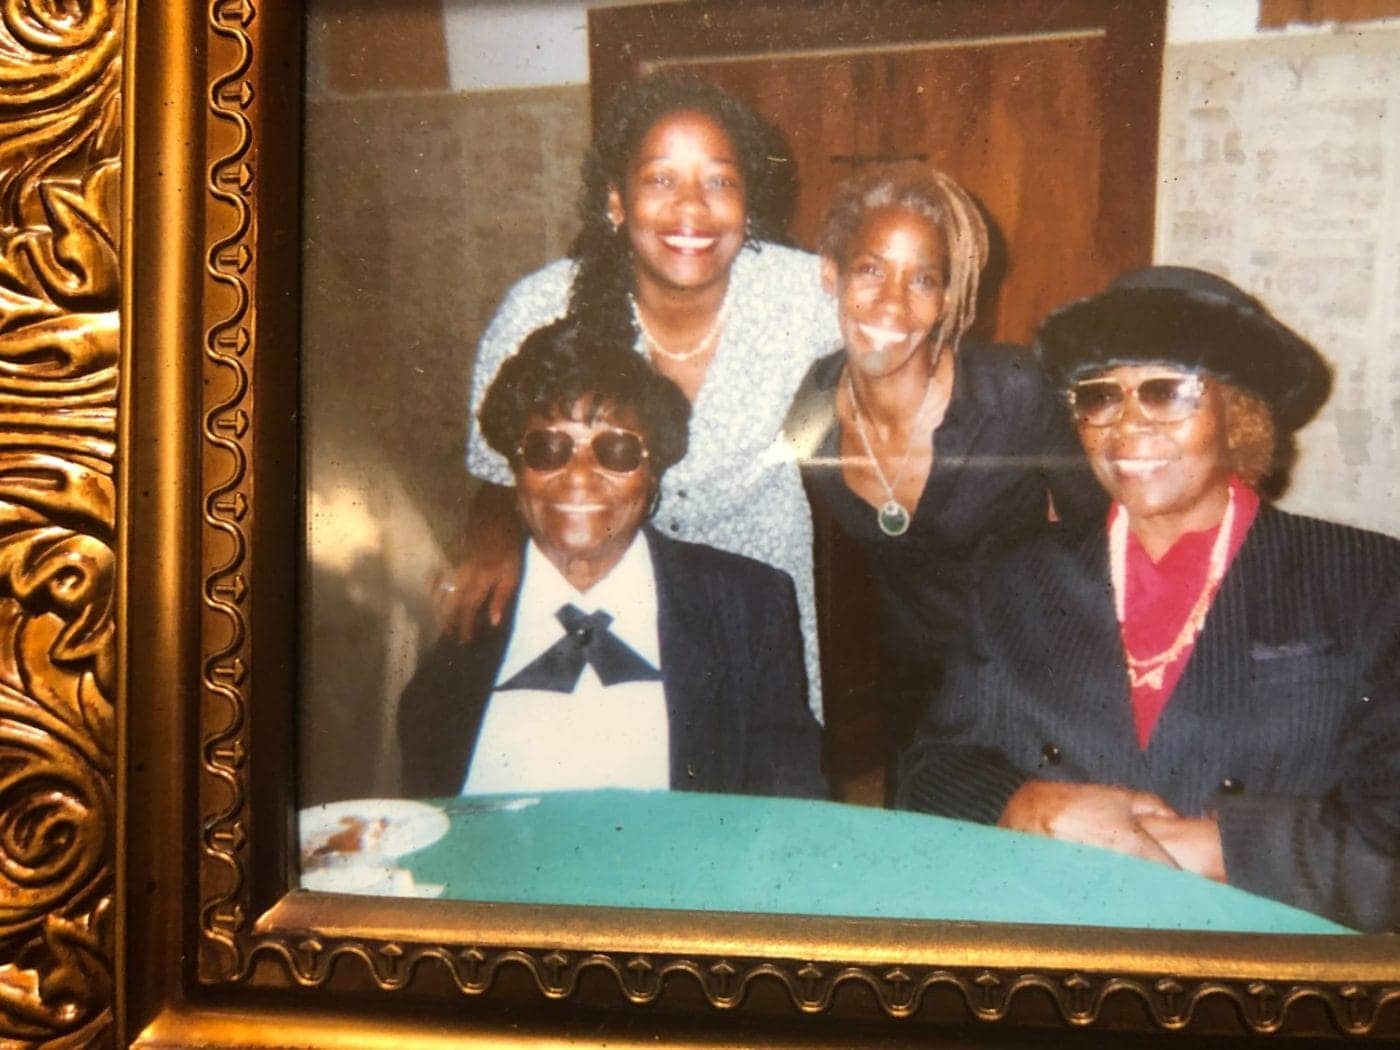 Izola-Frierson-with-sister-Lucille-and-cousin-Denise-and-daughter-Kathy-Frierson-at-a-homegoing-0506-1400x1050, Happy 100th birthday, Queen Izola of Bayview Hunters Point!, Culture Currents 